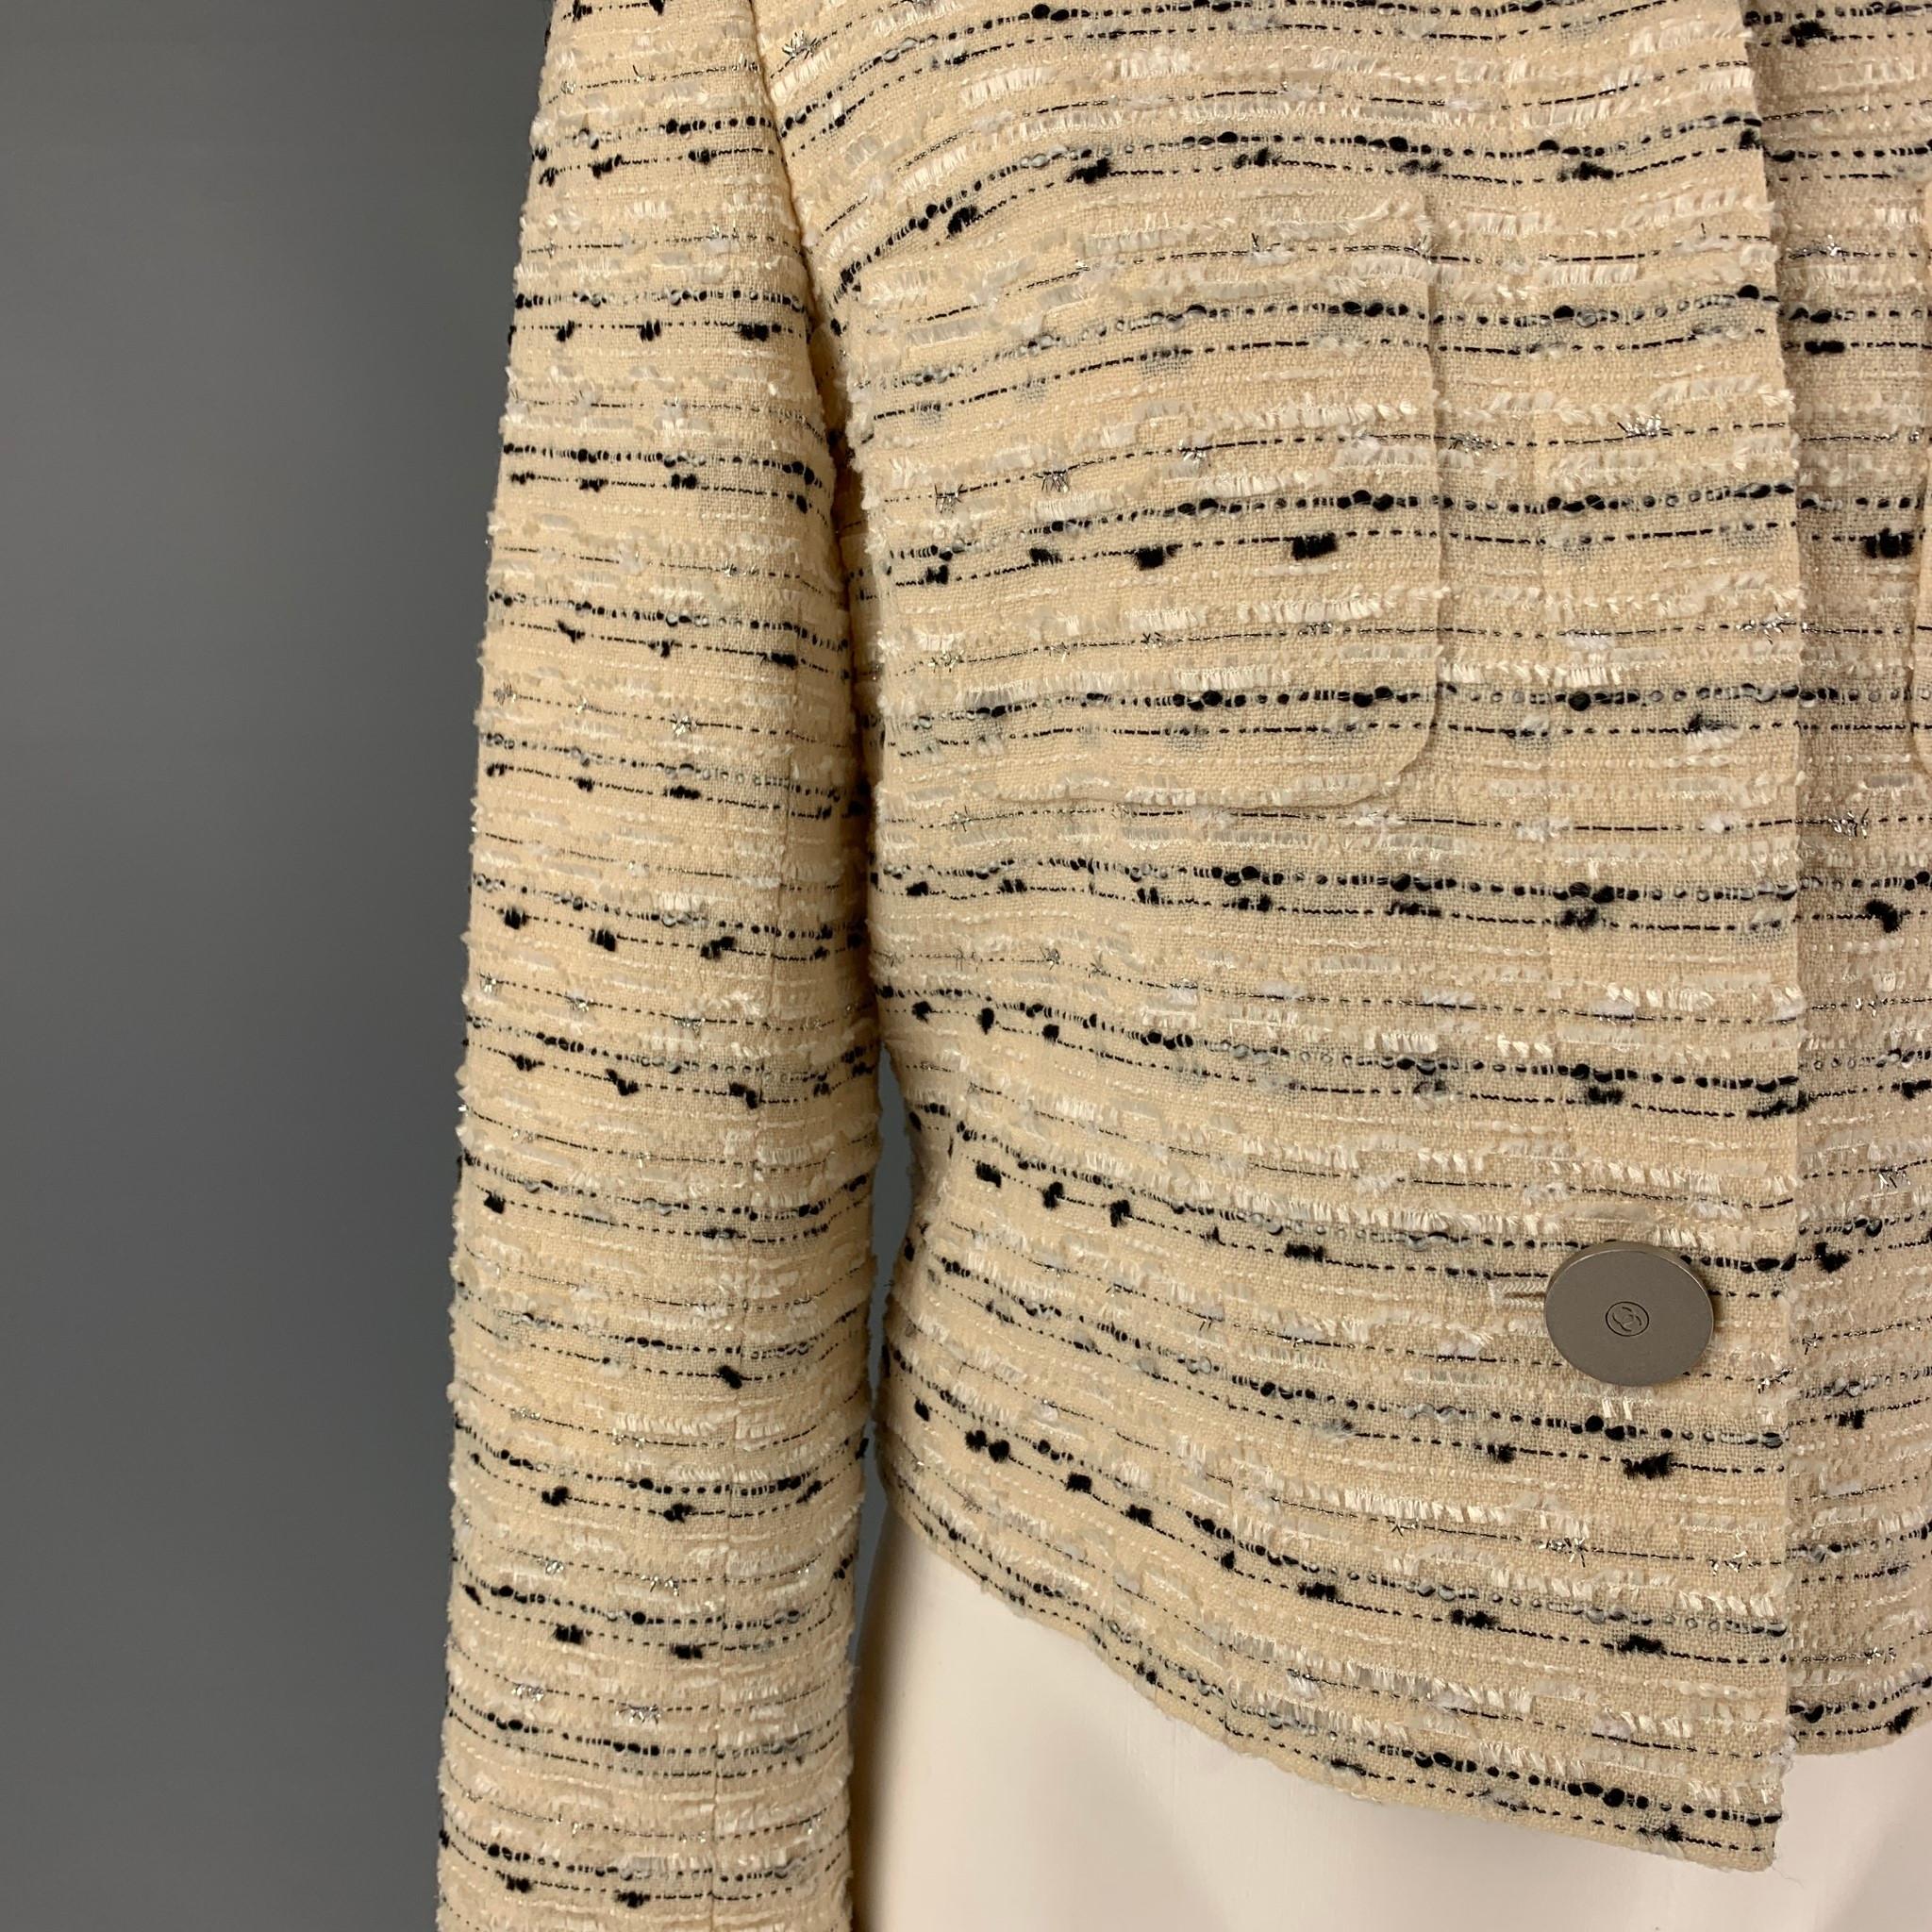 Vintage CHANEL BOUTIQUE 99C jacket comes in a cream & black boucle wool blend with a full monogram print featuring a spread collar, patch pockets, large silver tone logo detail, and a hidden placket closure. Made in France. 

Very Good Pre-Owned